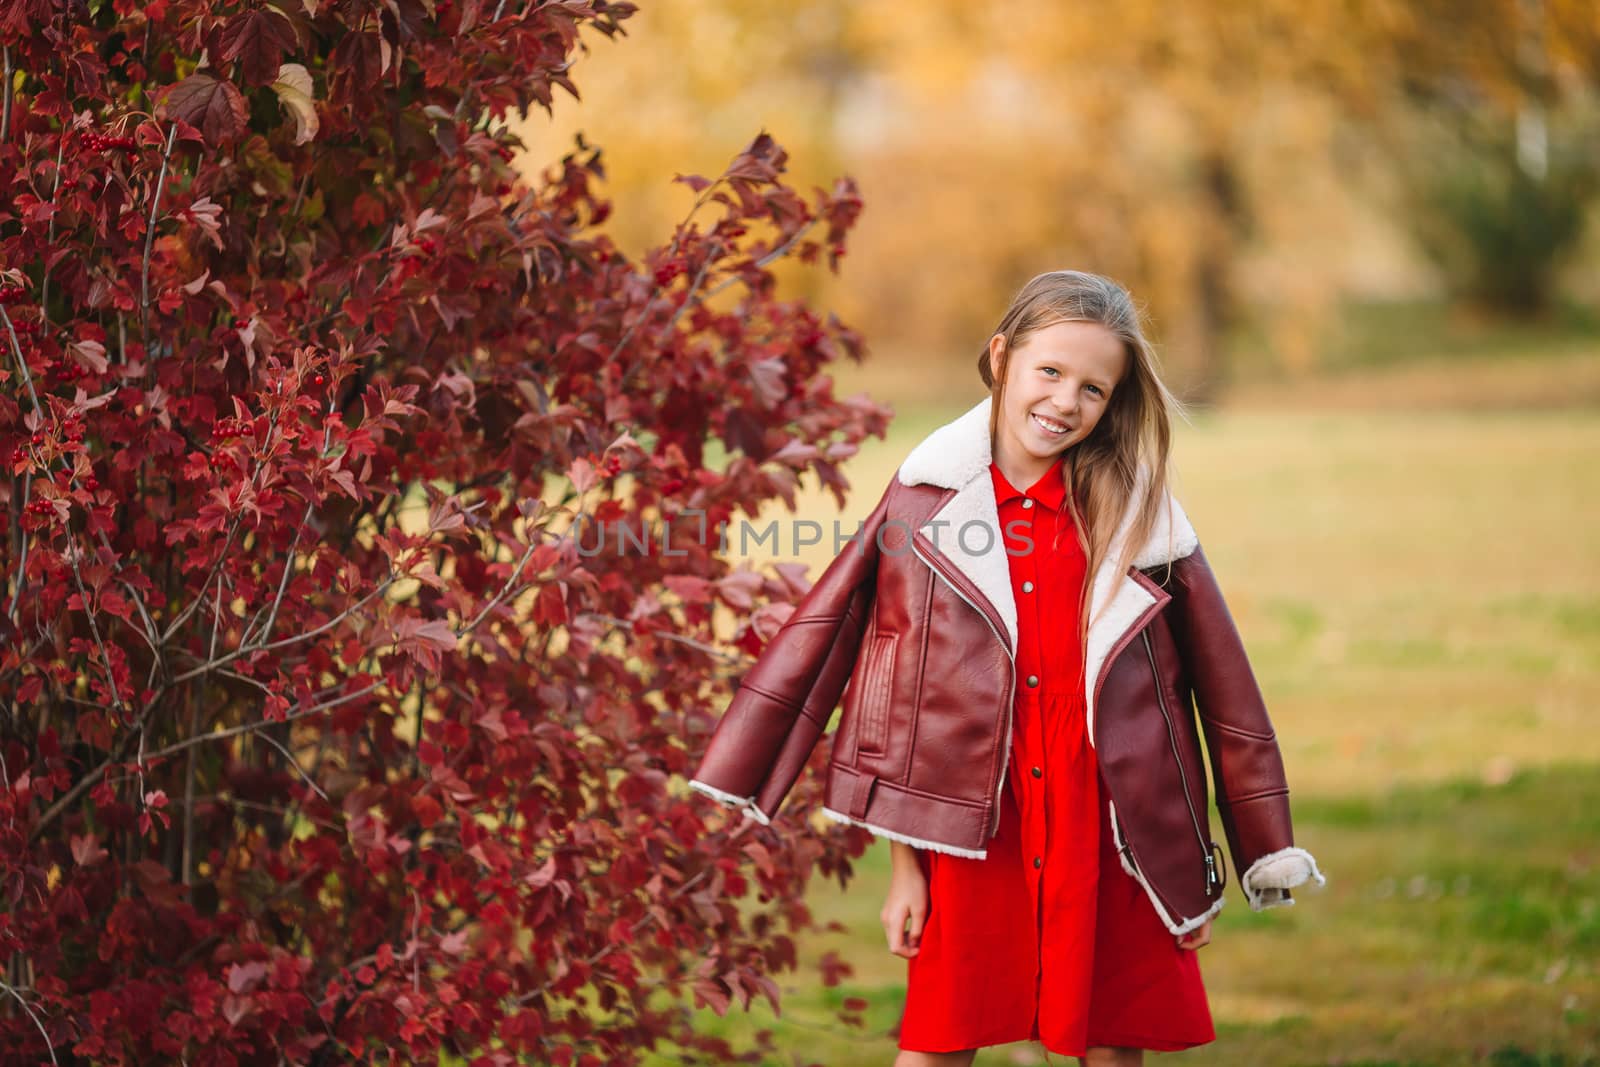 Adorable little girl at beautiful autumn day outdoors by travnikovstudio